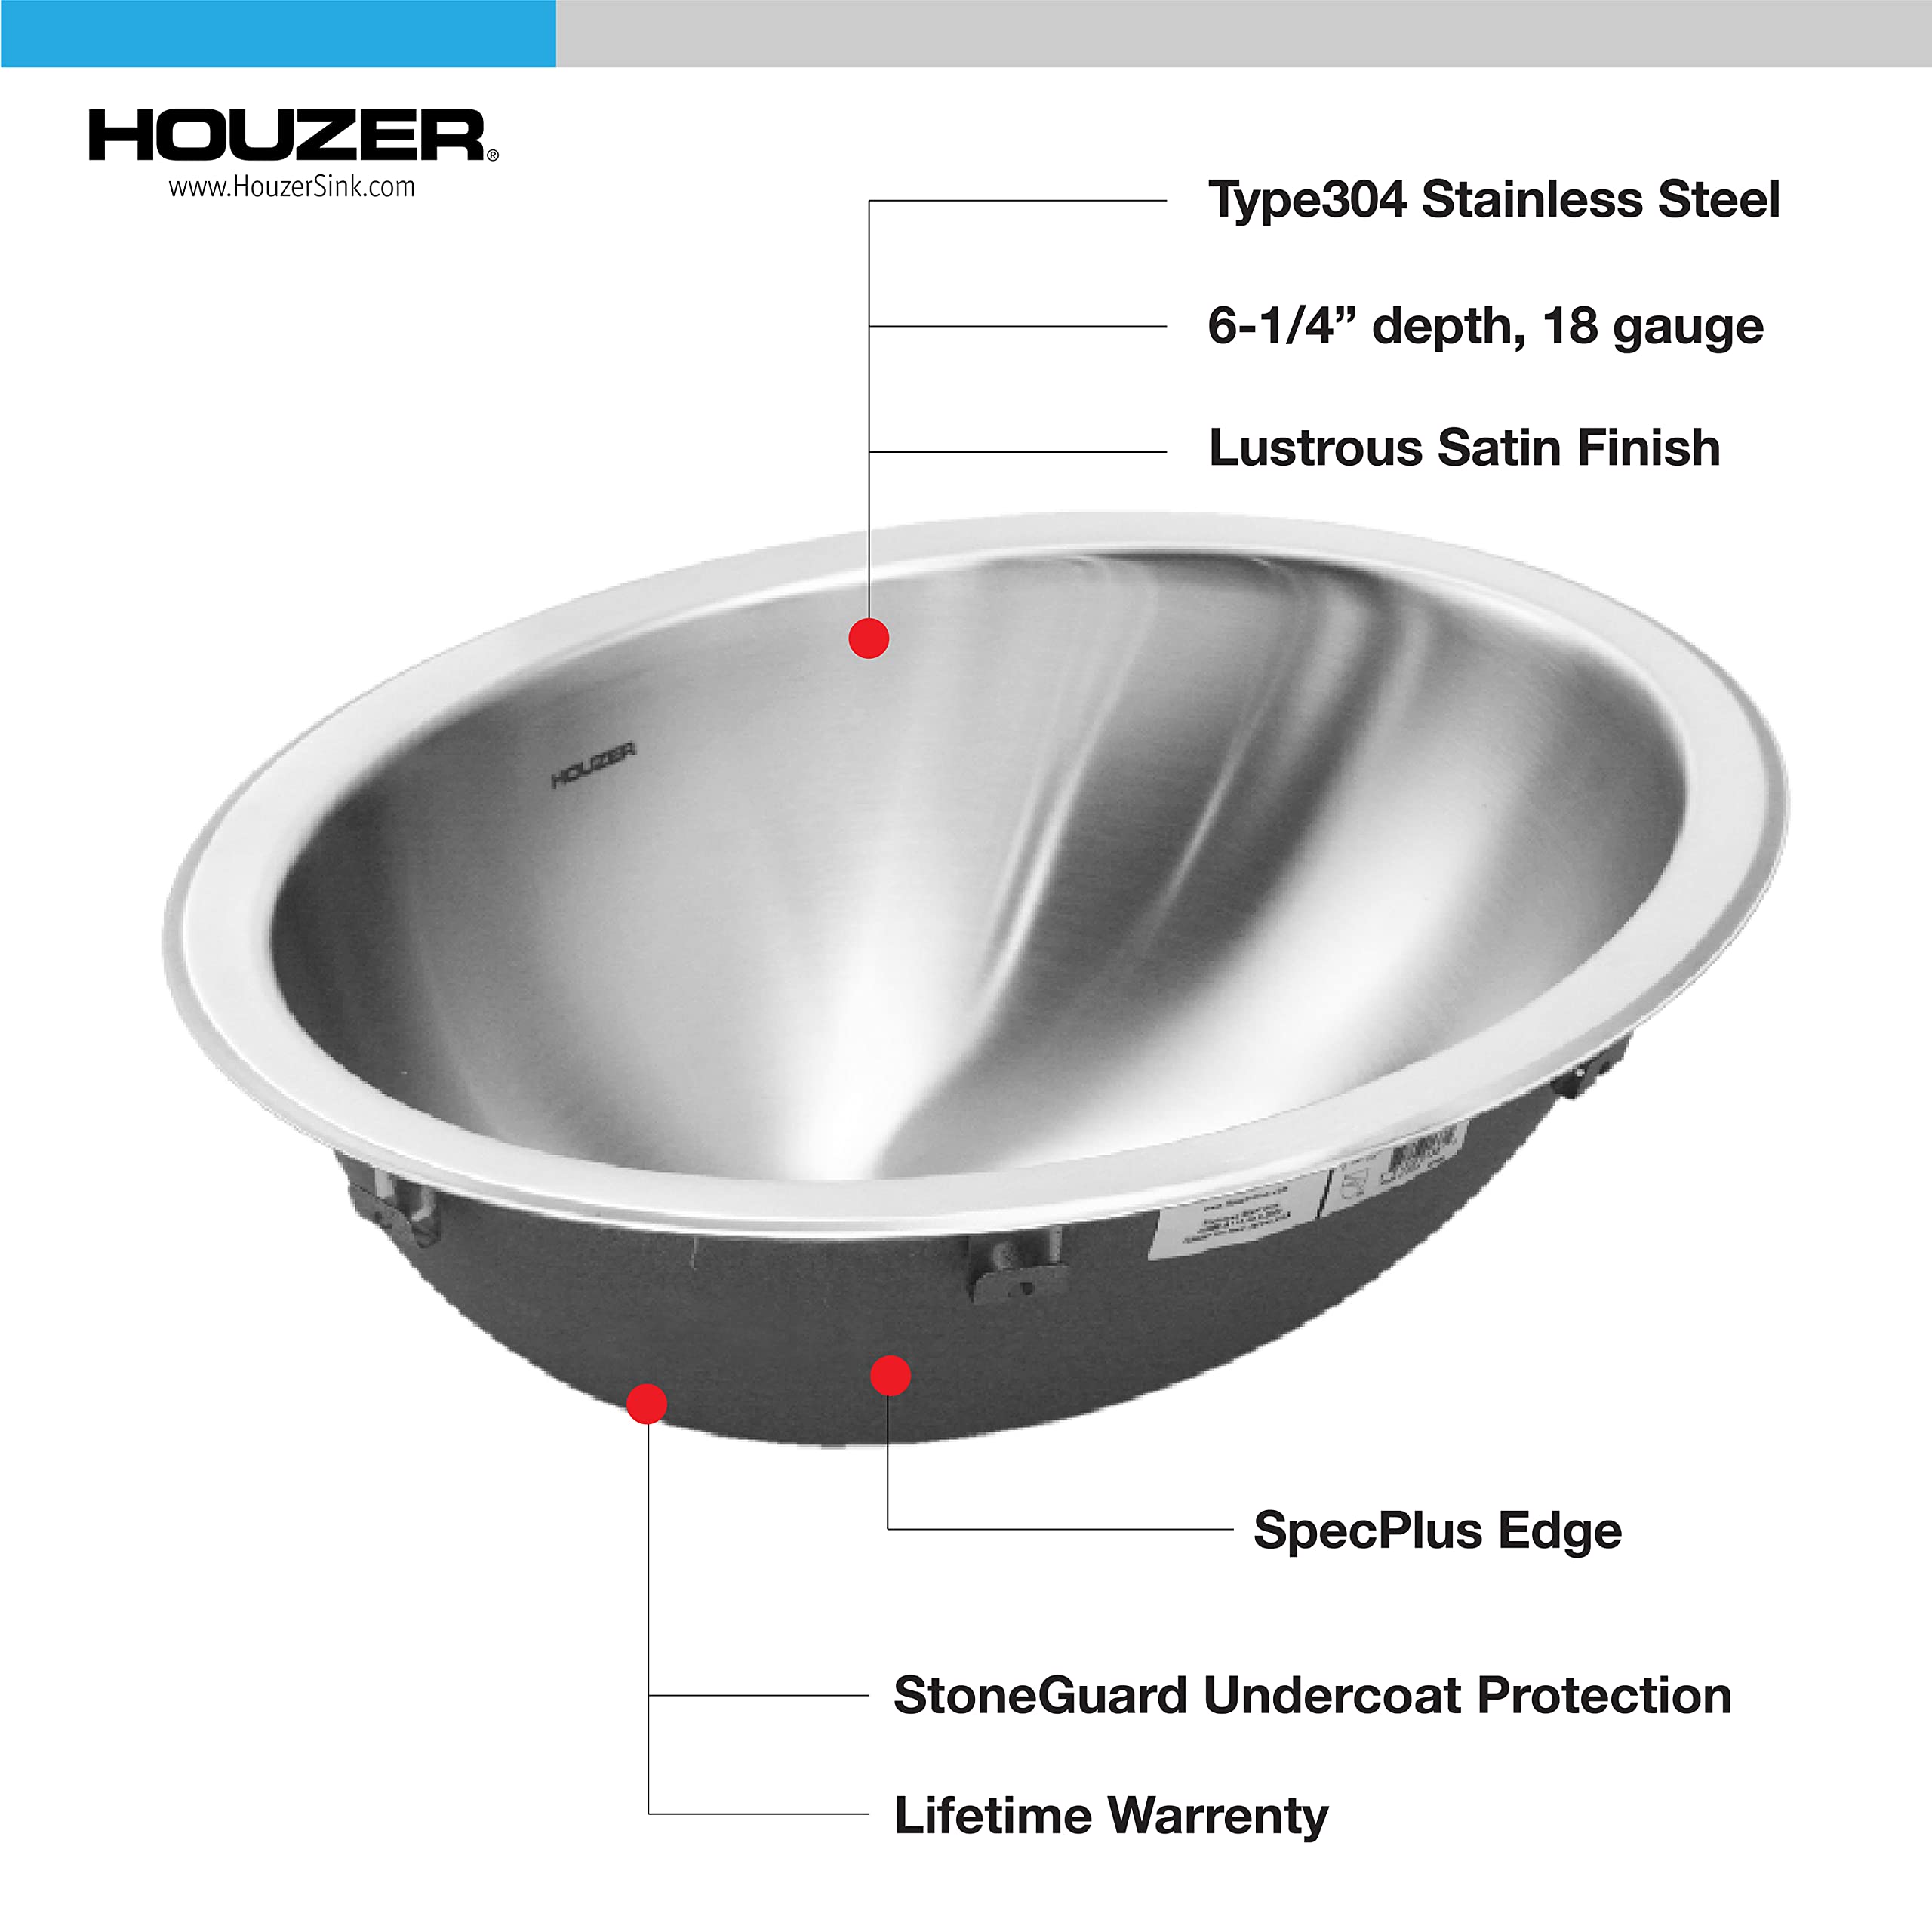 HOUZER Opus Series CHT-1800-1 Topmount Oval Bowl Bathroom Sink, Without Overflow, 17-3/4